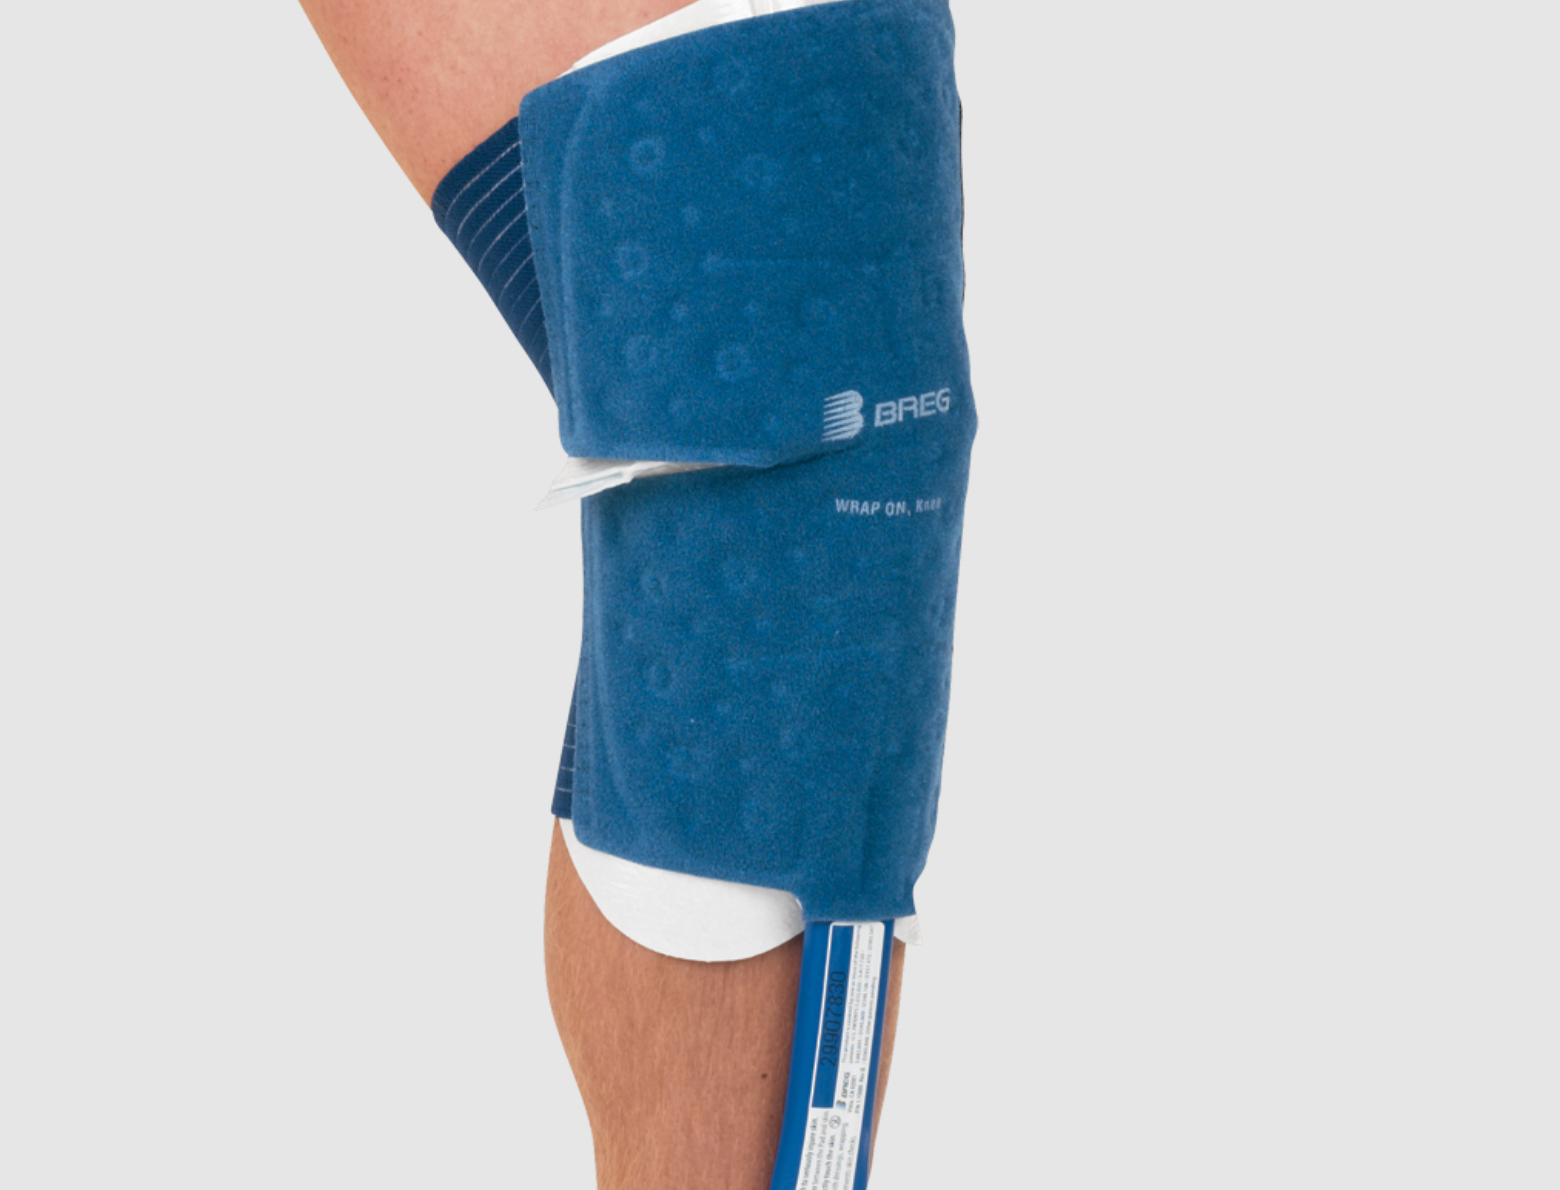 How to Use Breg Polar Cube for Knee